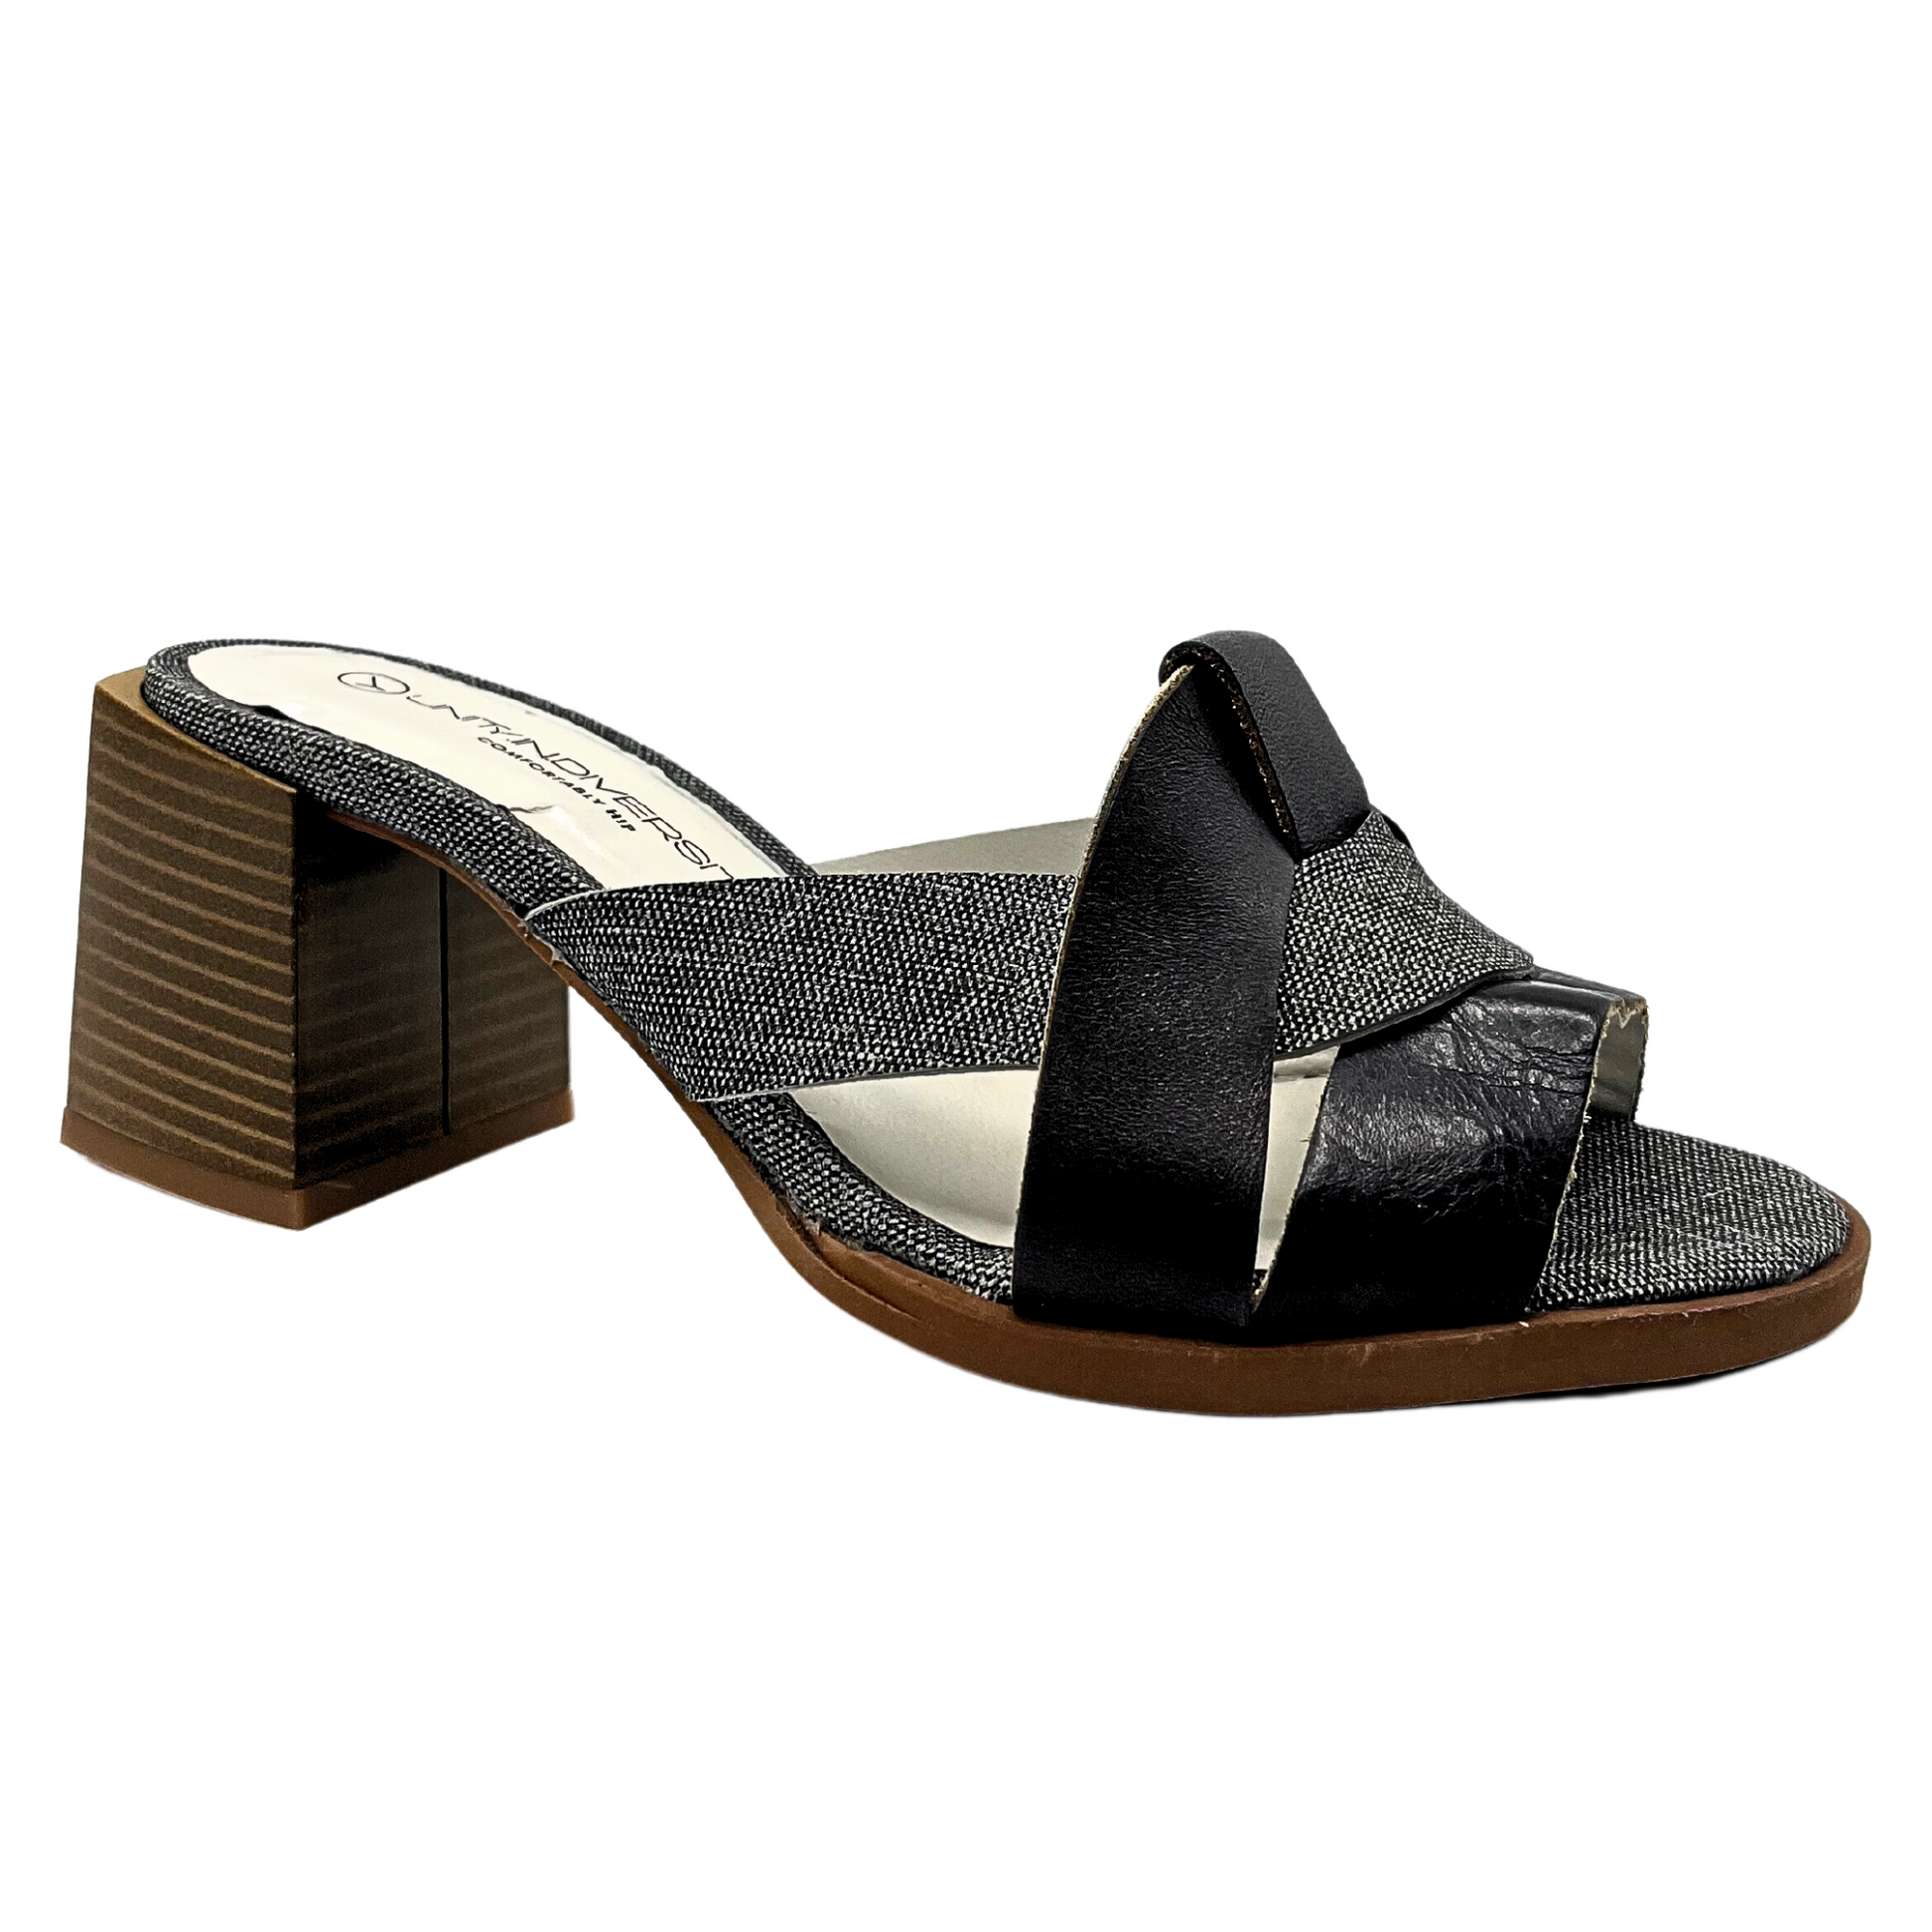 Angled side view of a lovelymule with a medium height stacked wood heel.  Smooth black leather is woven with a patterned black/white for a beautiful contrast